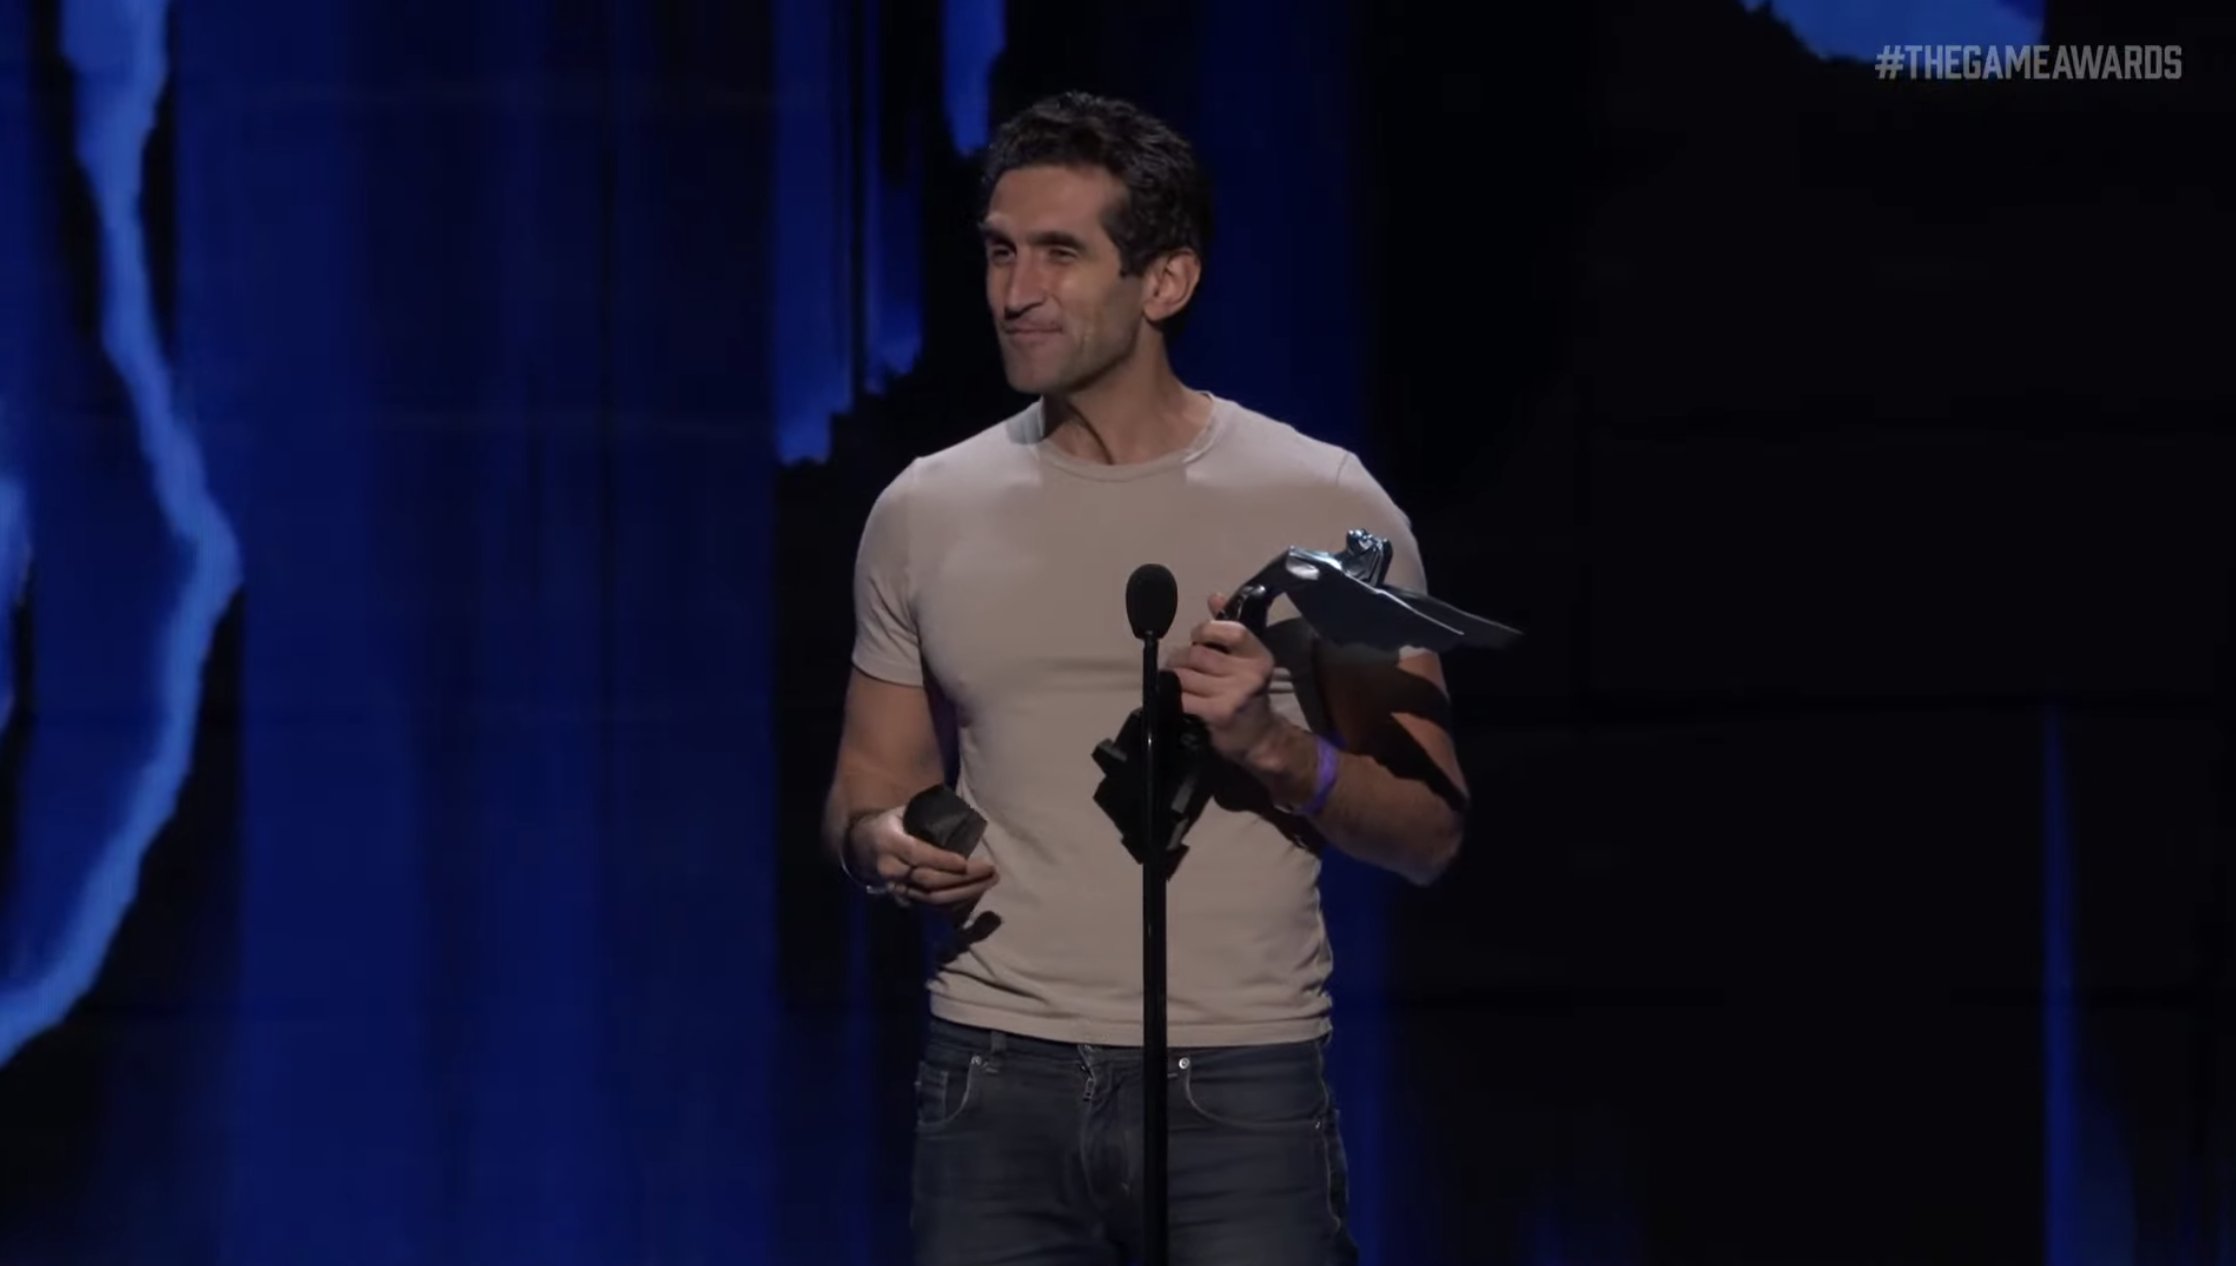 It Takes Two Wins Game Of The Year At The Game Awards